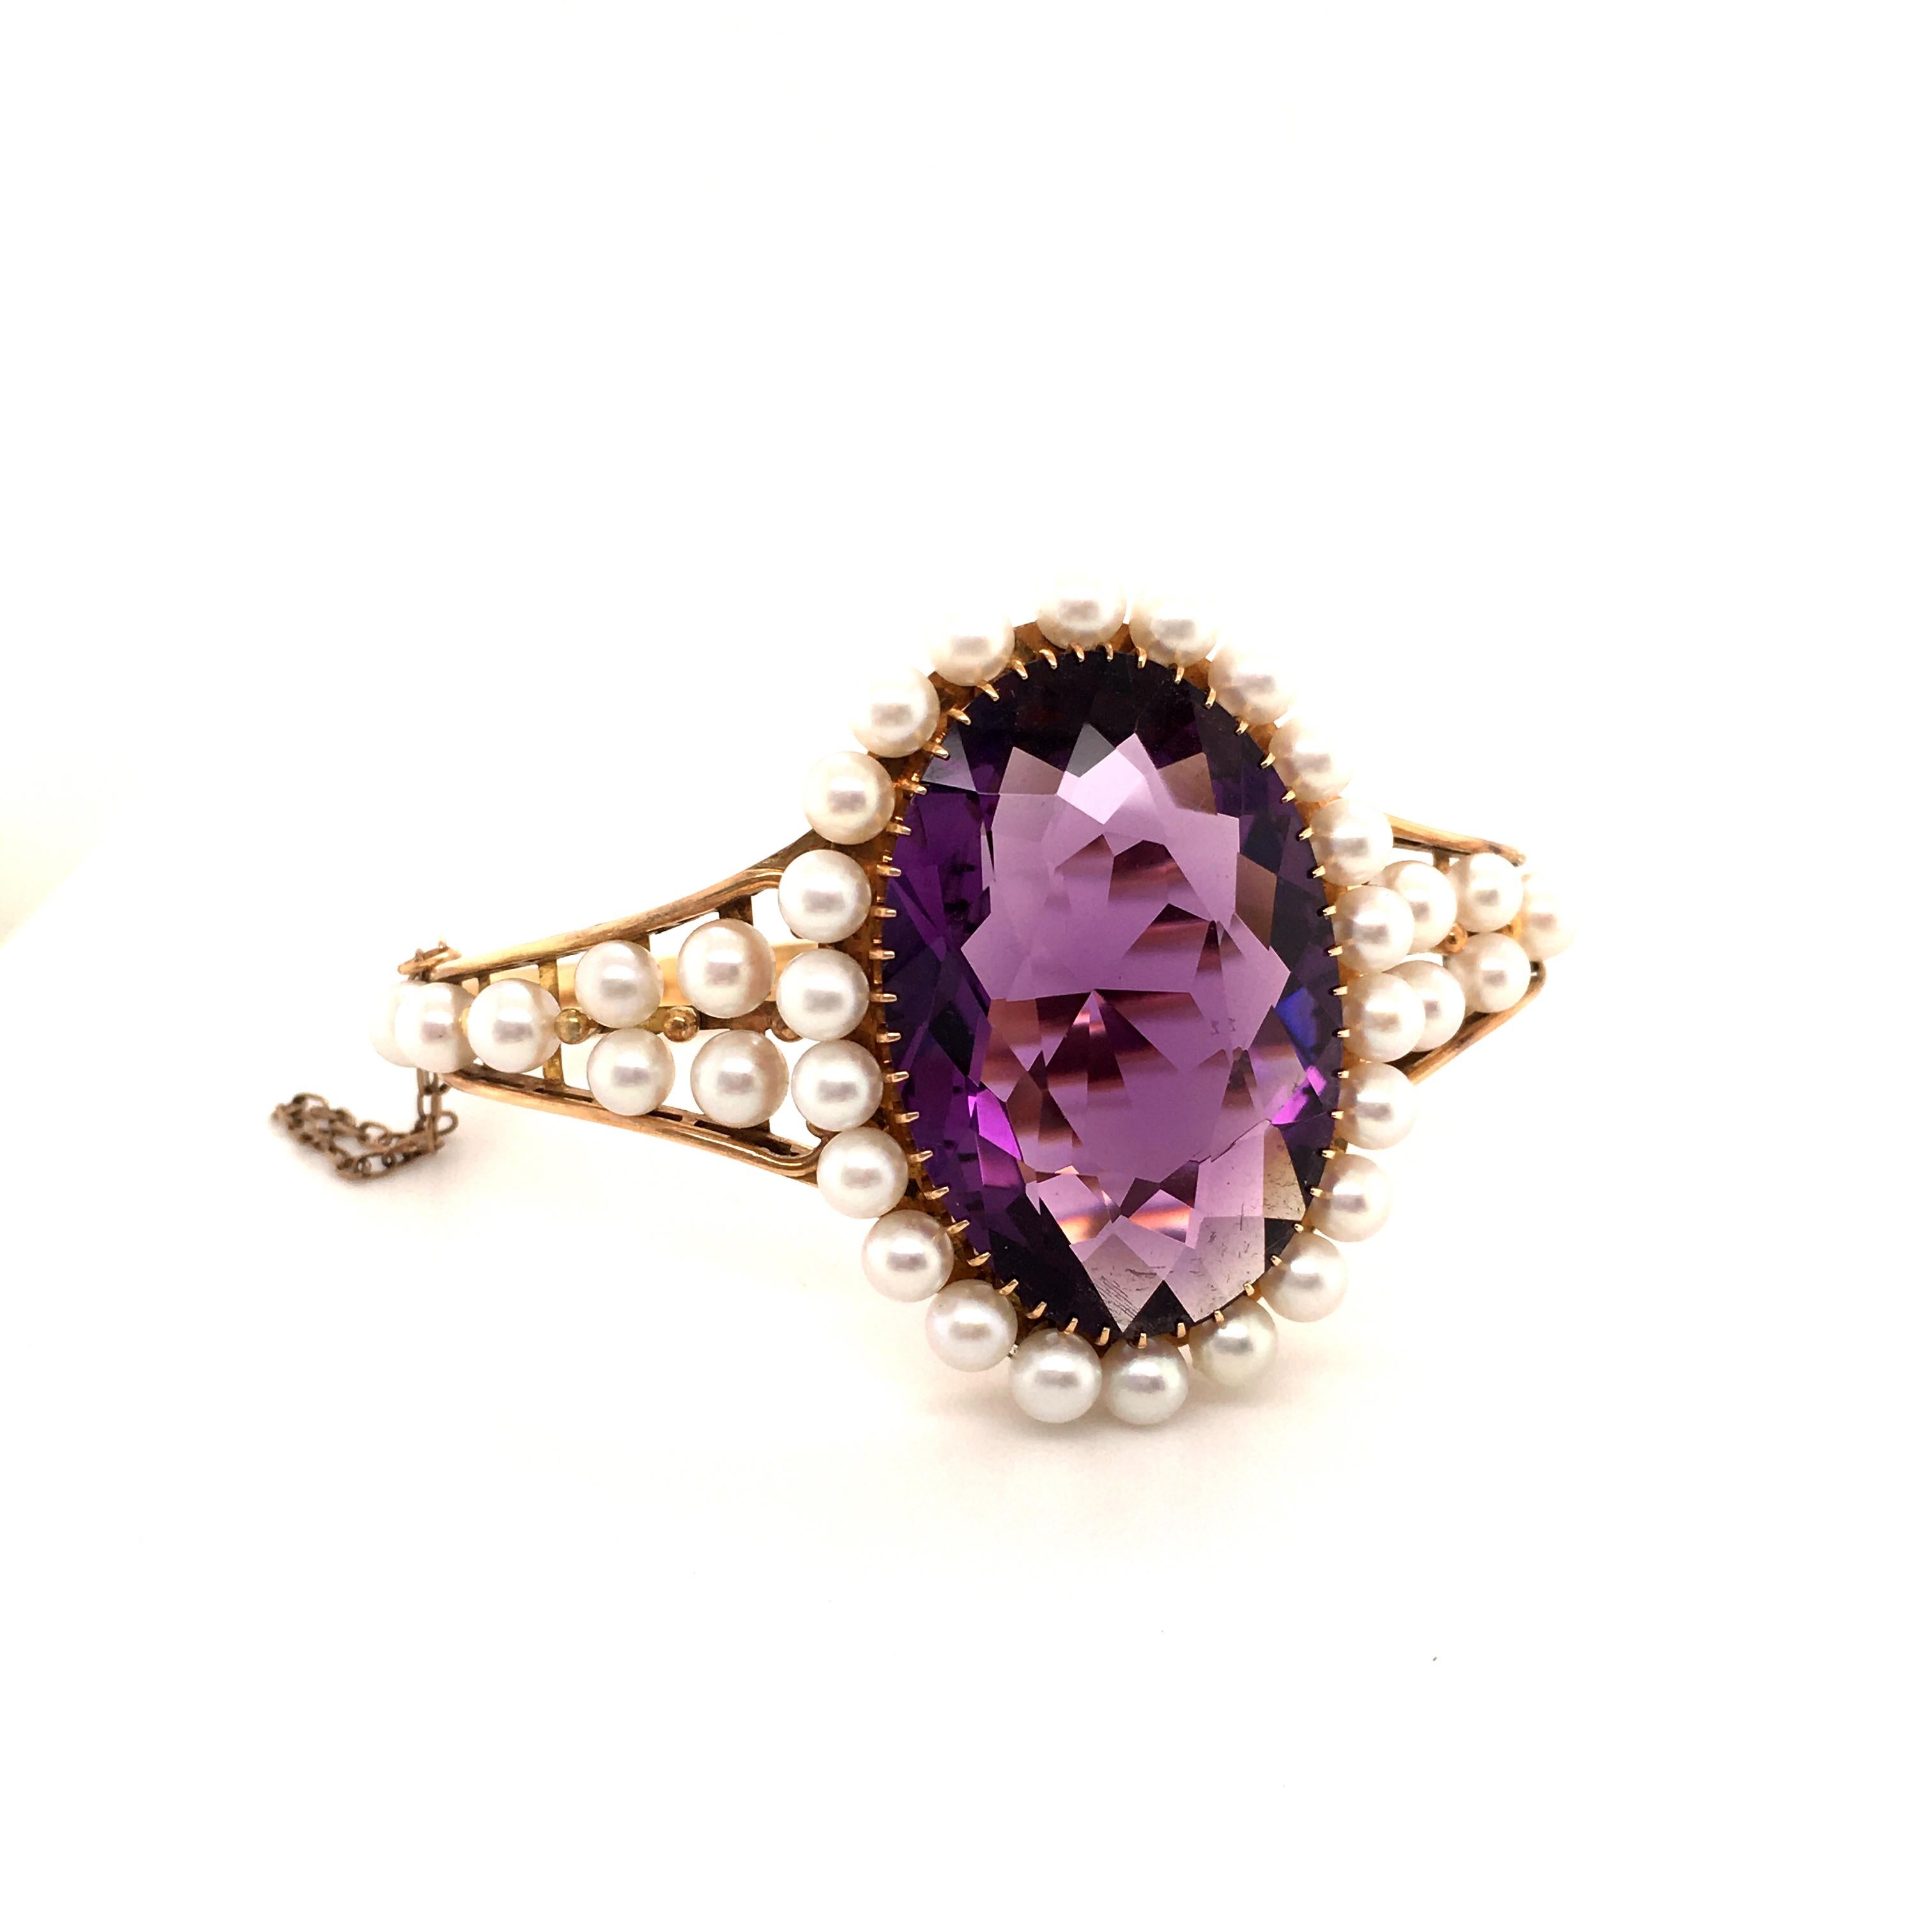 Retro Antique Amethyst and Pearl Bangle in 18 Karat Gold